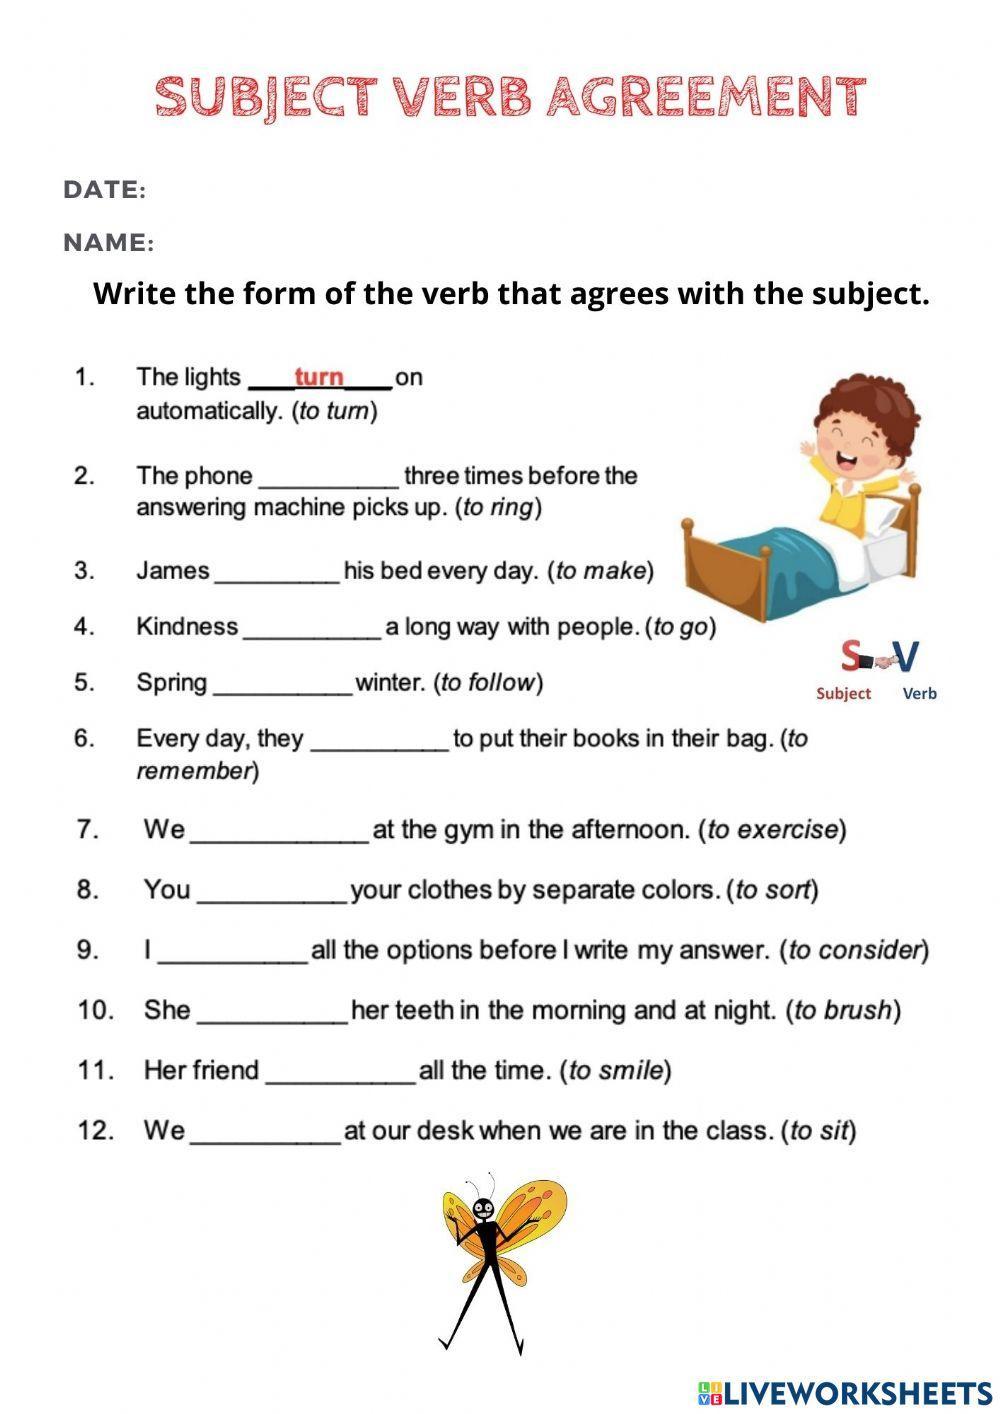 L3-Subject - Verb Agreement